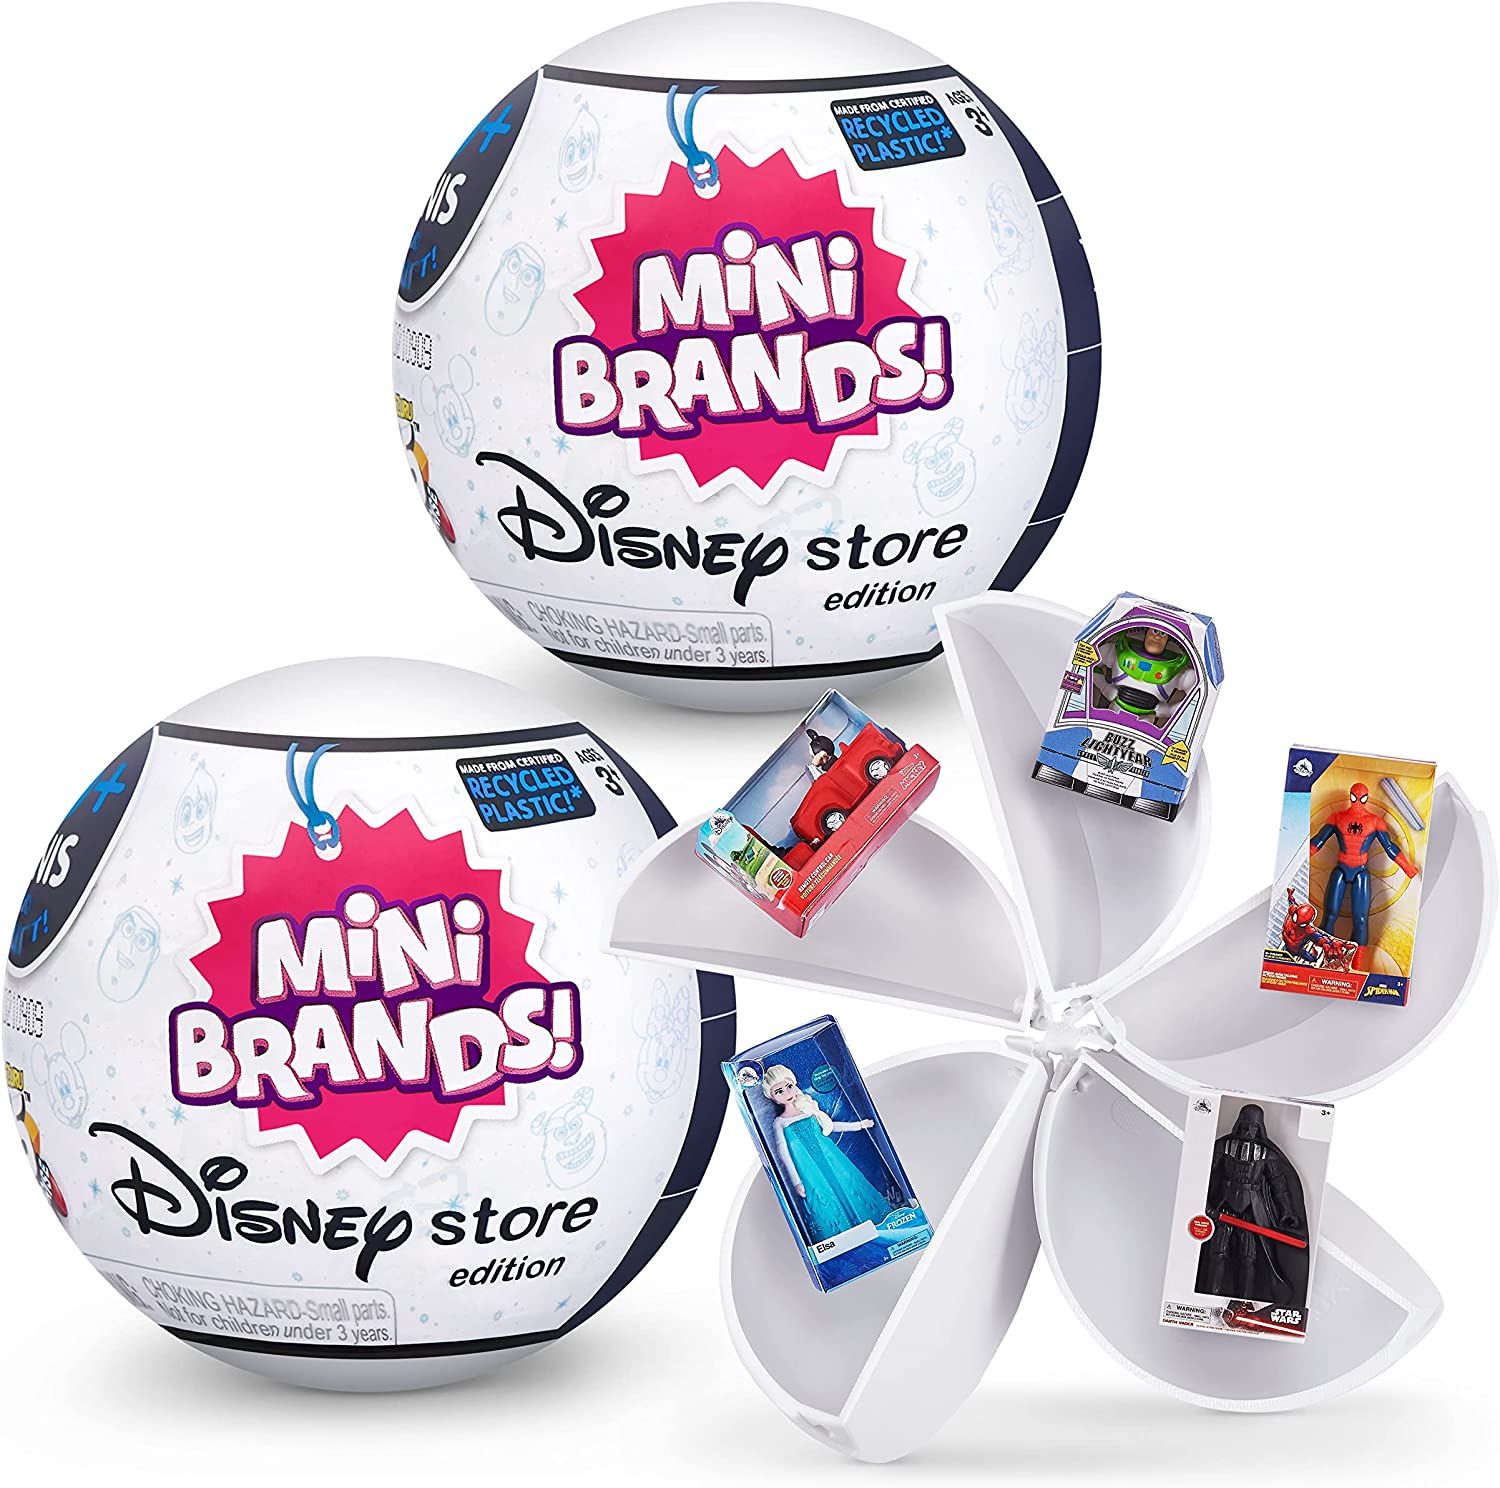 Disney mini brand capsules are the best Disney collectibles